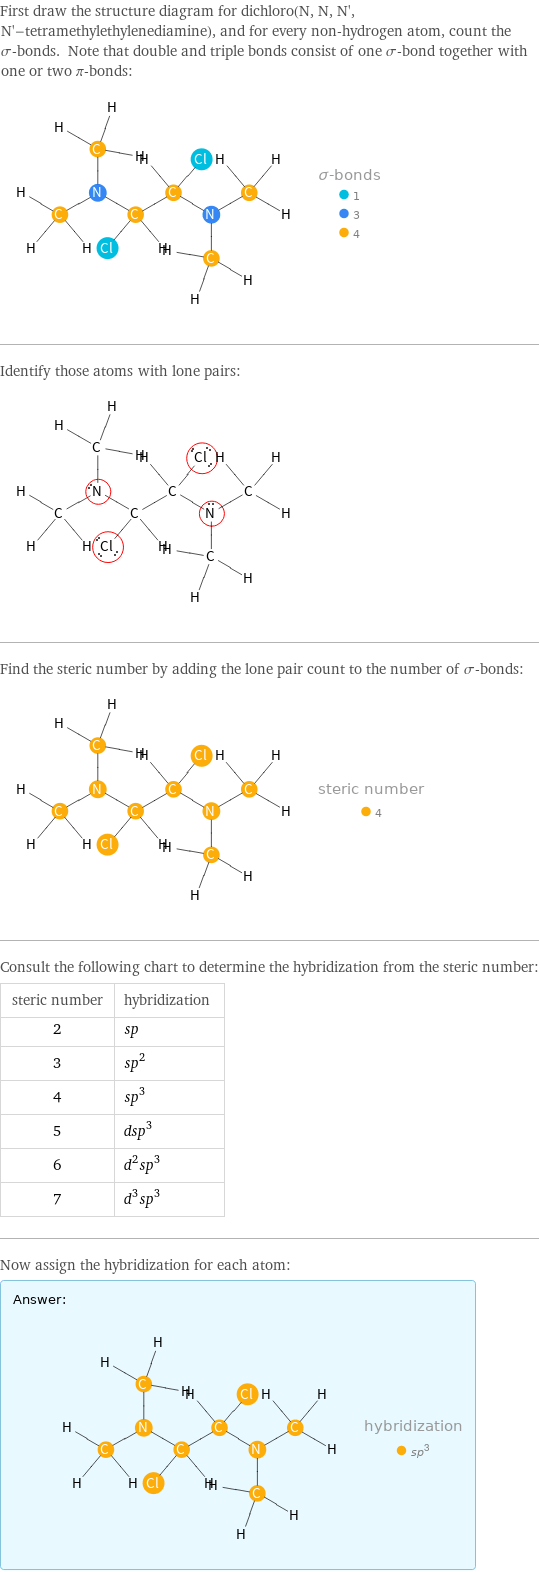 First draw the structure diagram for dichloro(N, N, N', N'-tetramethylethylenediamine), and for every non-hydrogen atom, count the σ-bonds. Note that double and triple bonds consist of one σ-bond together with one or two π-bonds:  Identify those atoms with lone pairs:  Find the steric number by adding the lone pair count to the number of σ-bonds:  Consult the following chart to determine the hybridization from the steric number: steric number | hybridization 2 | sp 3 | sp^2 4 | sp^3 5 | dsp^3 6 | d^2sp^3 7 | d^3sp^3 Now assign the hybridization for each atom: Answer: |   | 